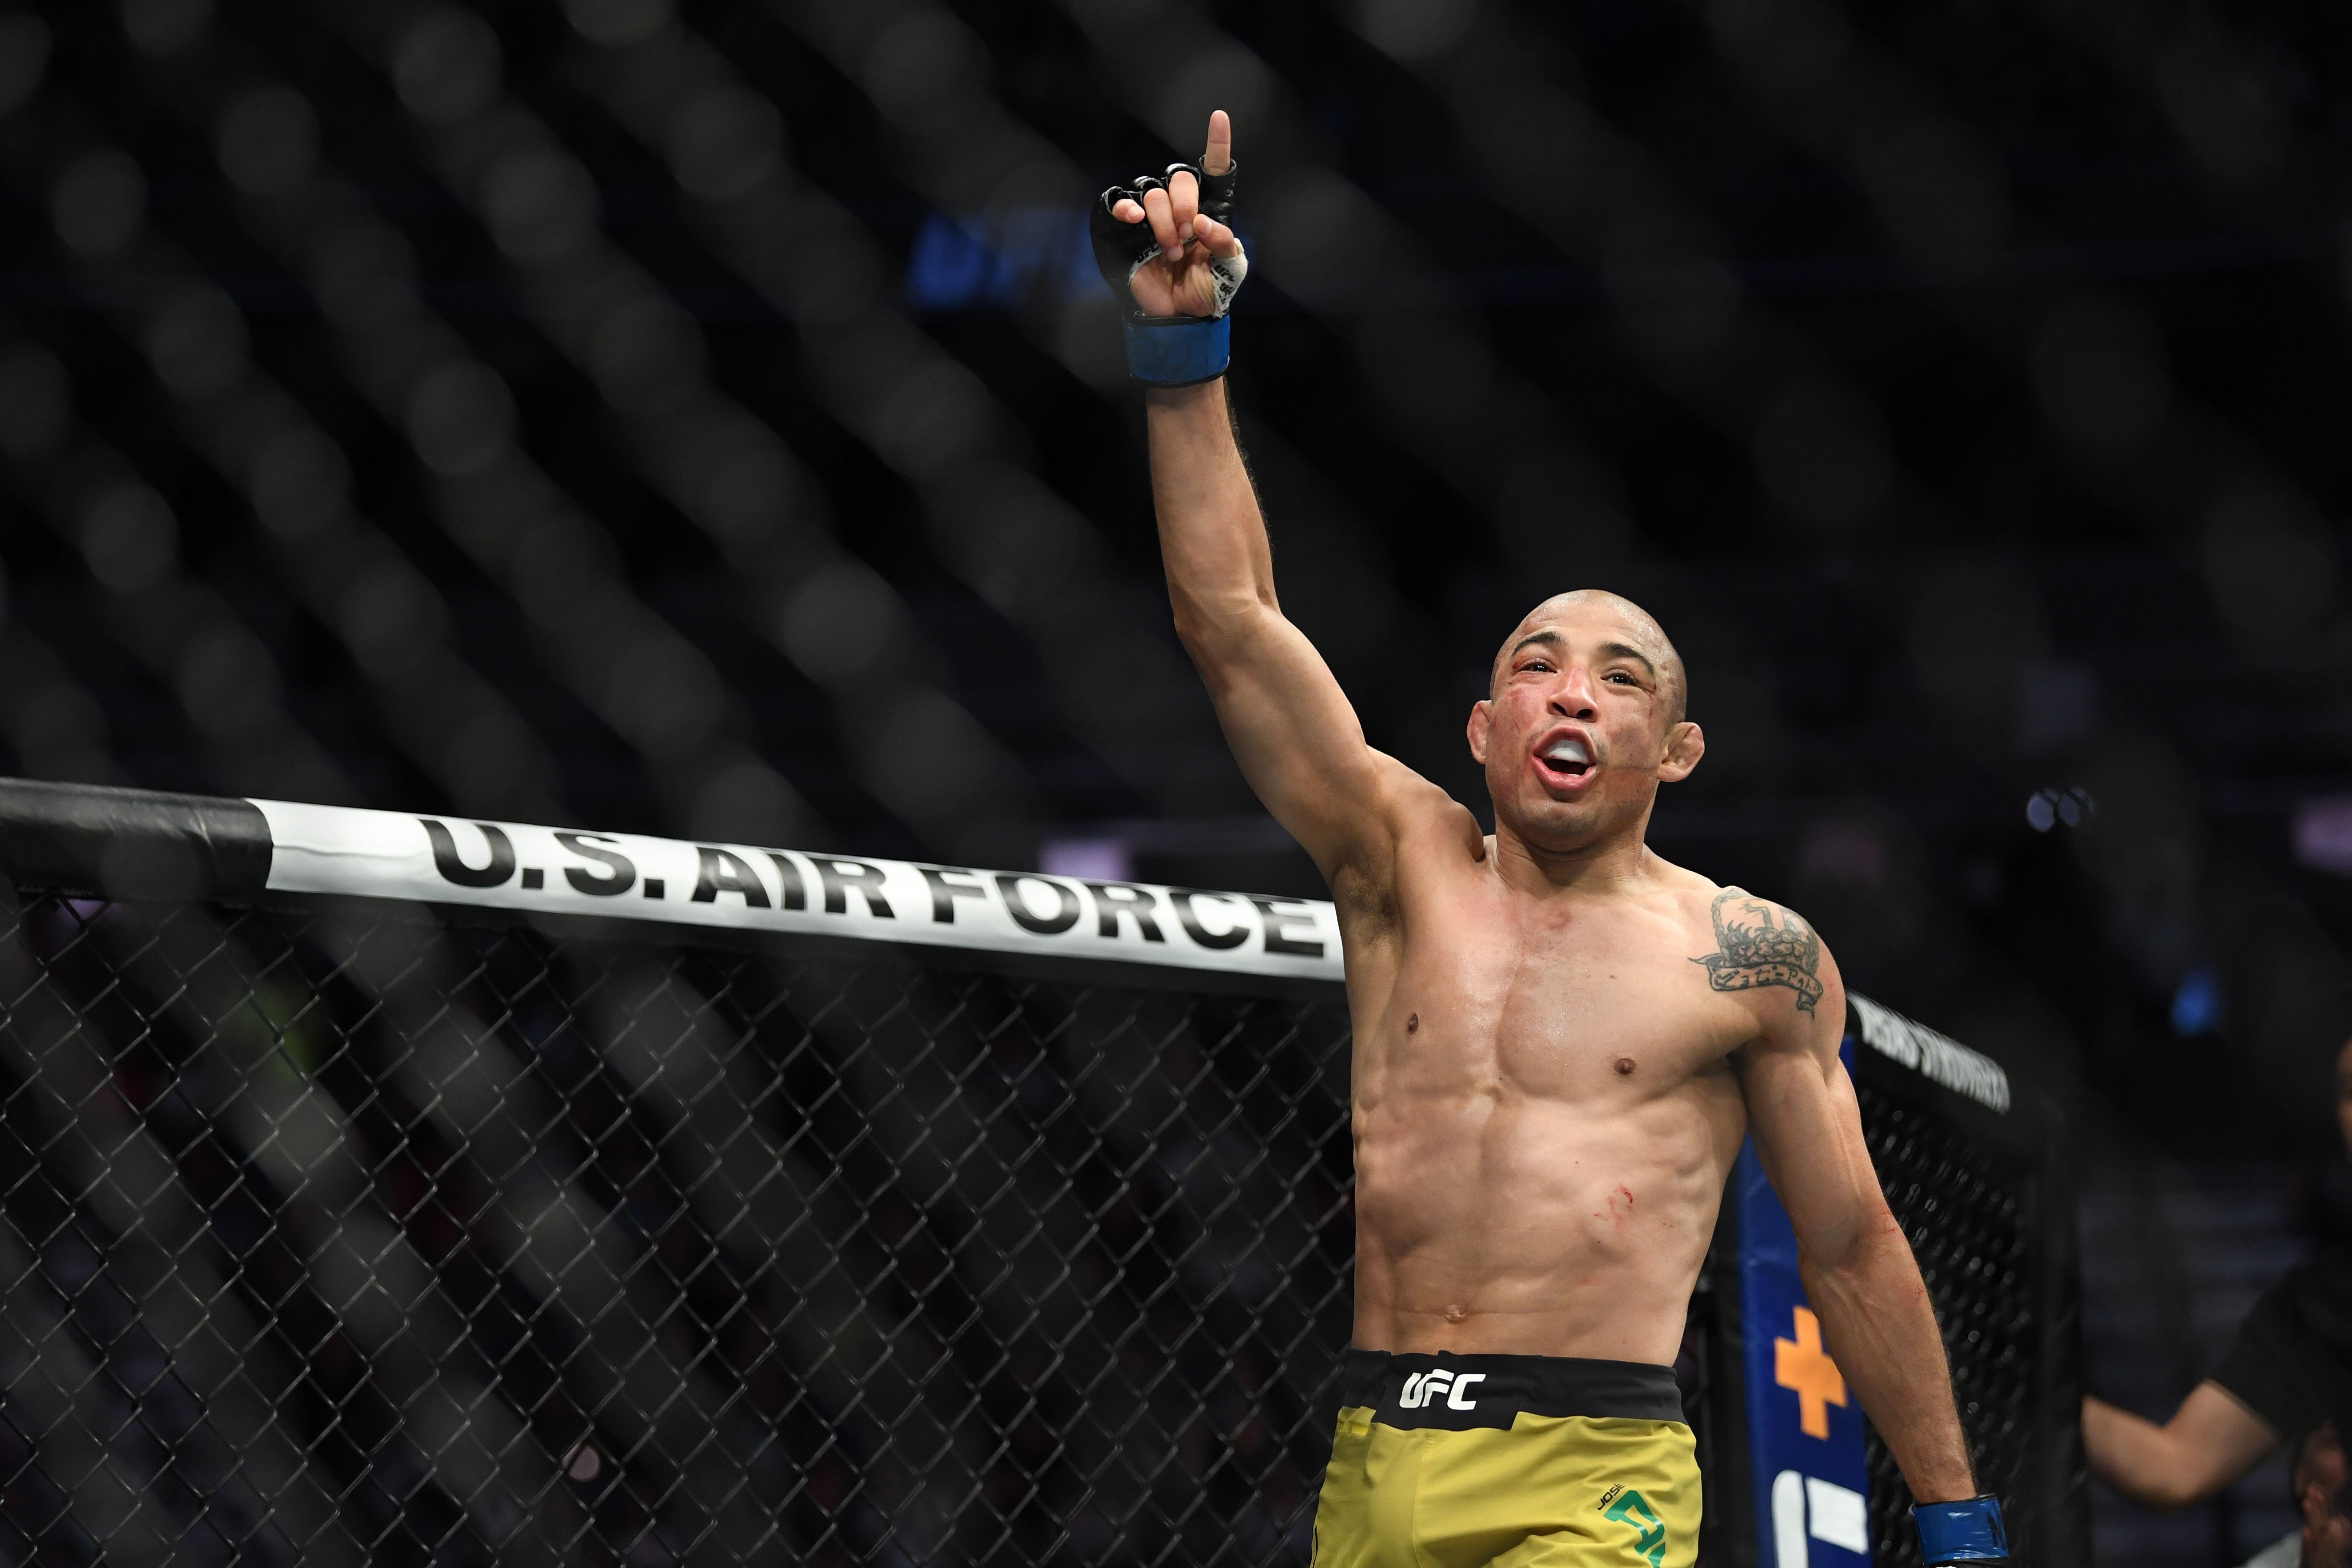 Jose Aldo reacts after his bout against Marlon Moraes during UFC 245 at T-Mobile Arena. Photo: USA TODAY Sports